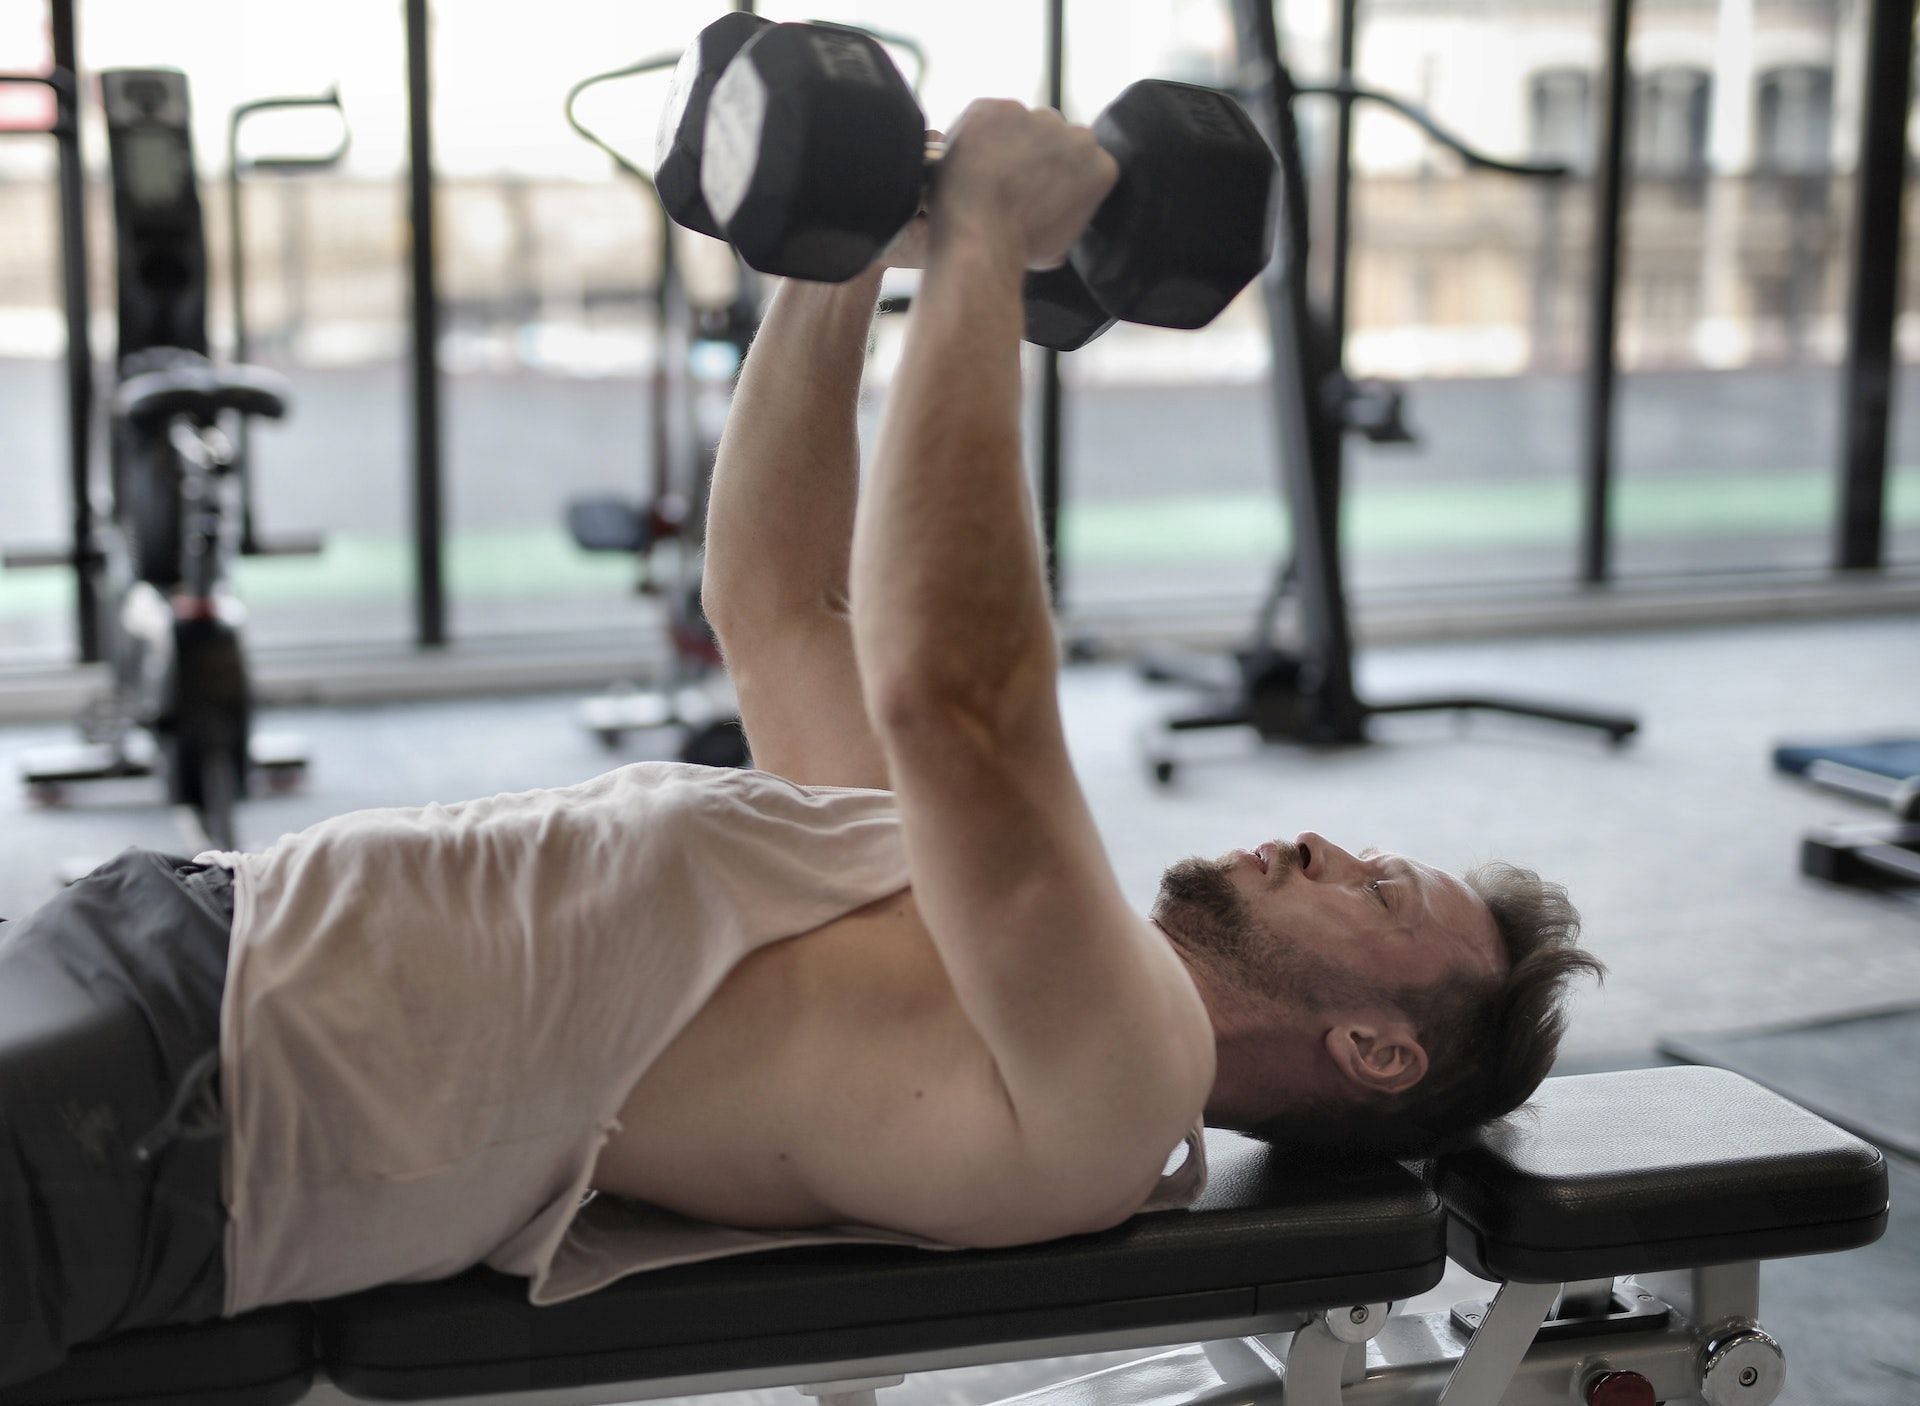 Chest compound exercises target the back and triceps, too. (Photo via Pexels/Andrea Piacquadio)